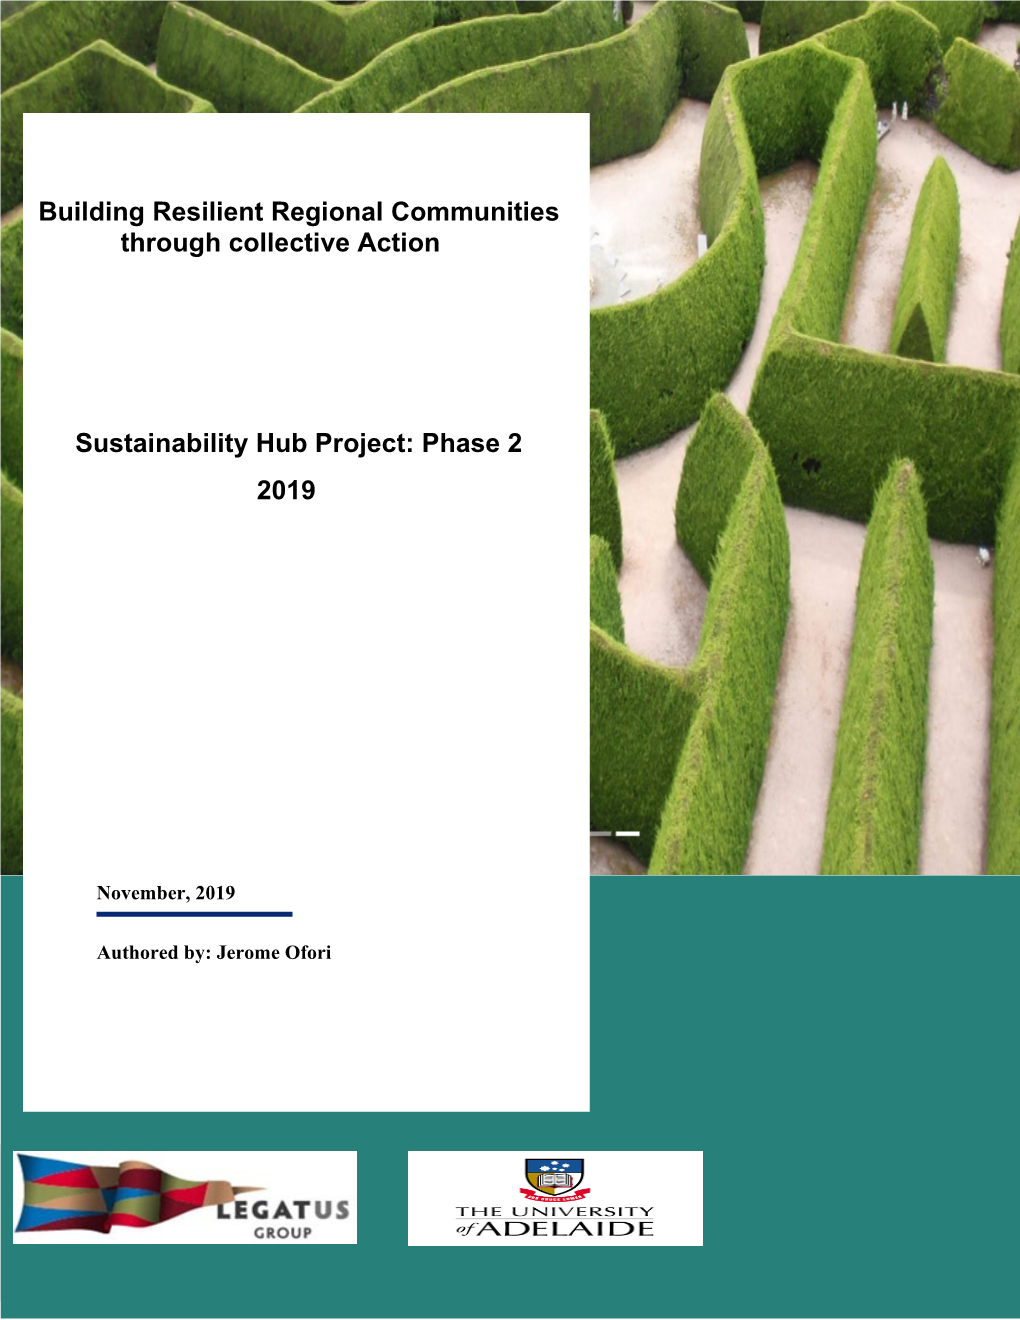 Building Resilient Regional Communities Through Collective Action